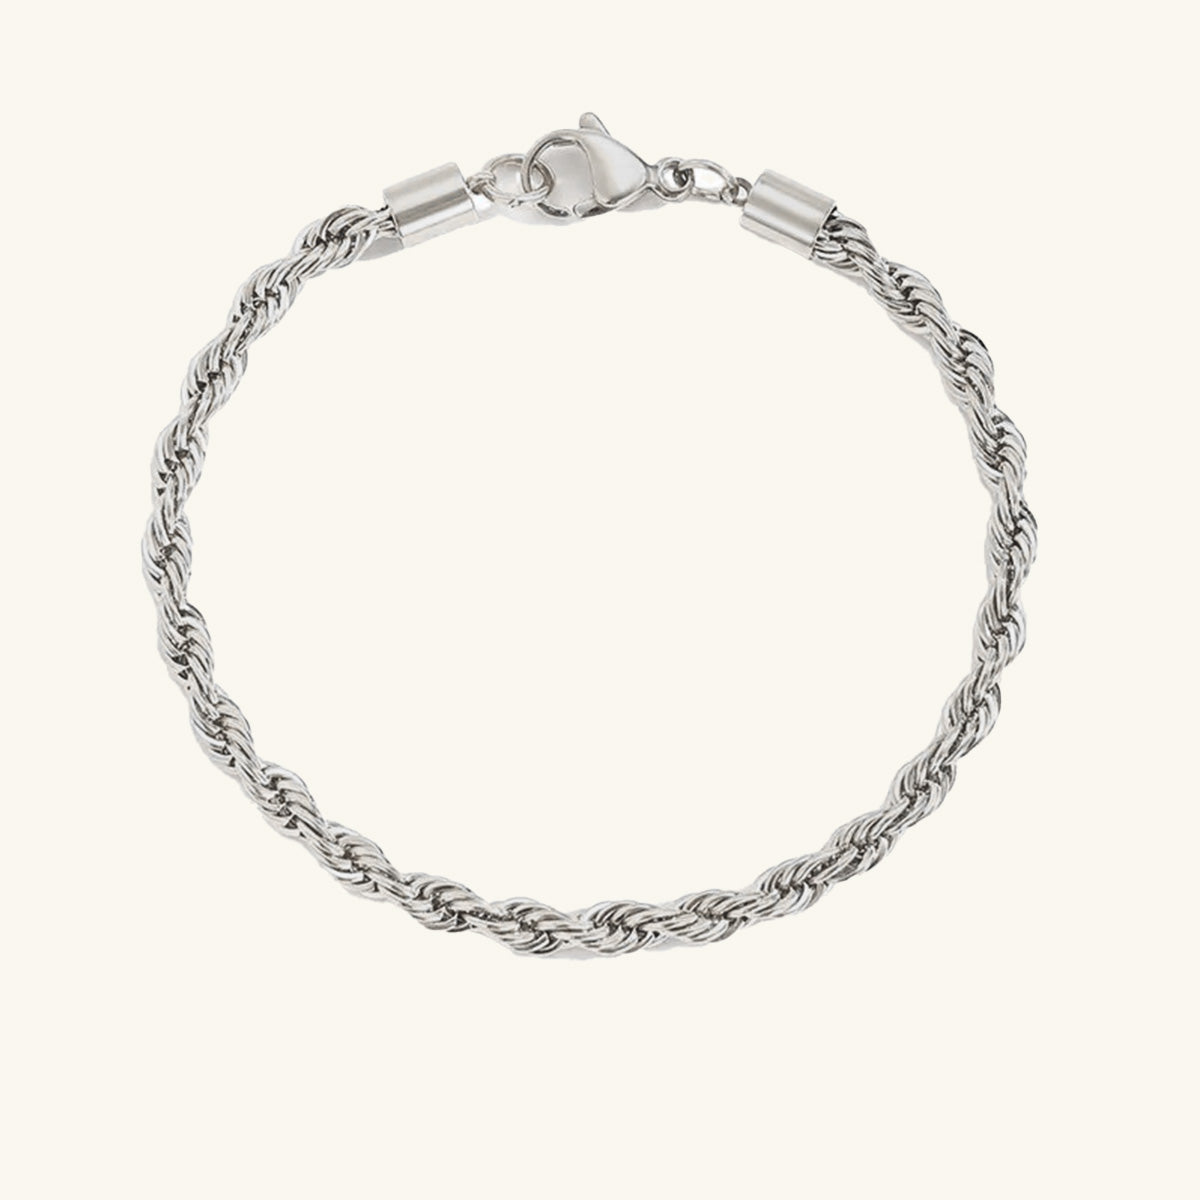 Twisted Rope Chain Bracelet - Wrenlee